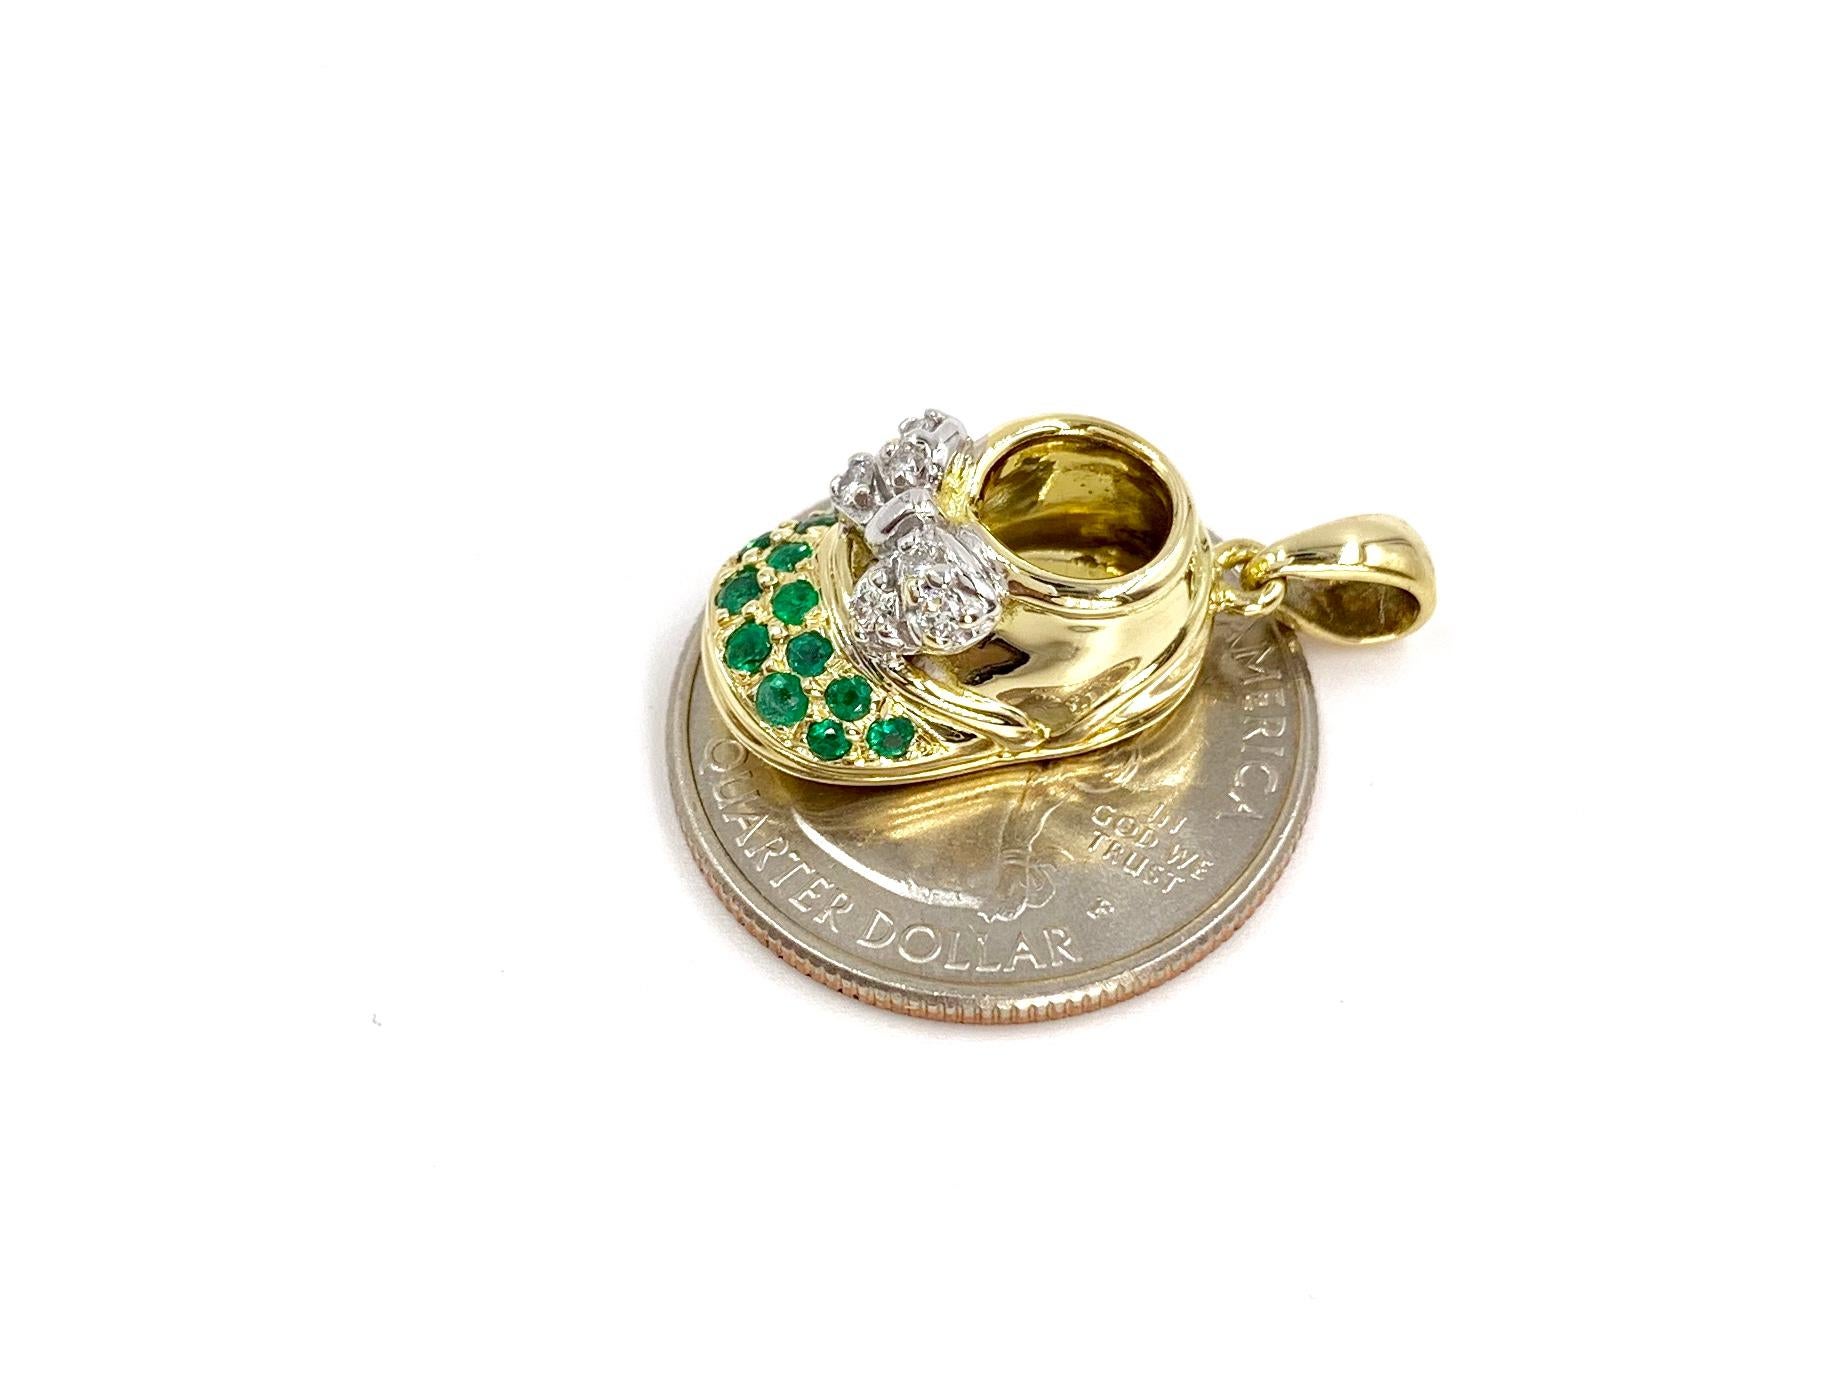 Felix Vollman 18 Karat Gold Baby Shoe Charm with Emeralds and Diamonds In Excellent Condition For Sale In Pikesville, MD